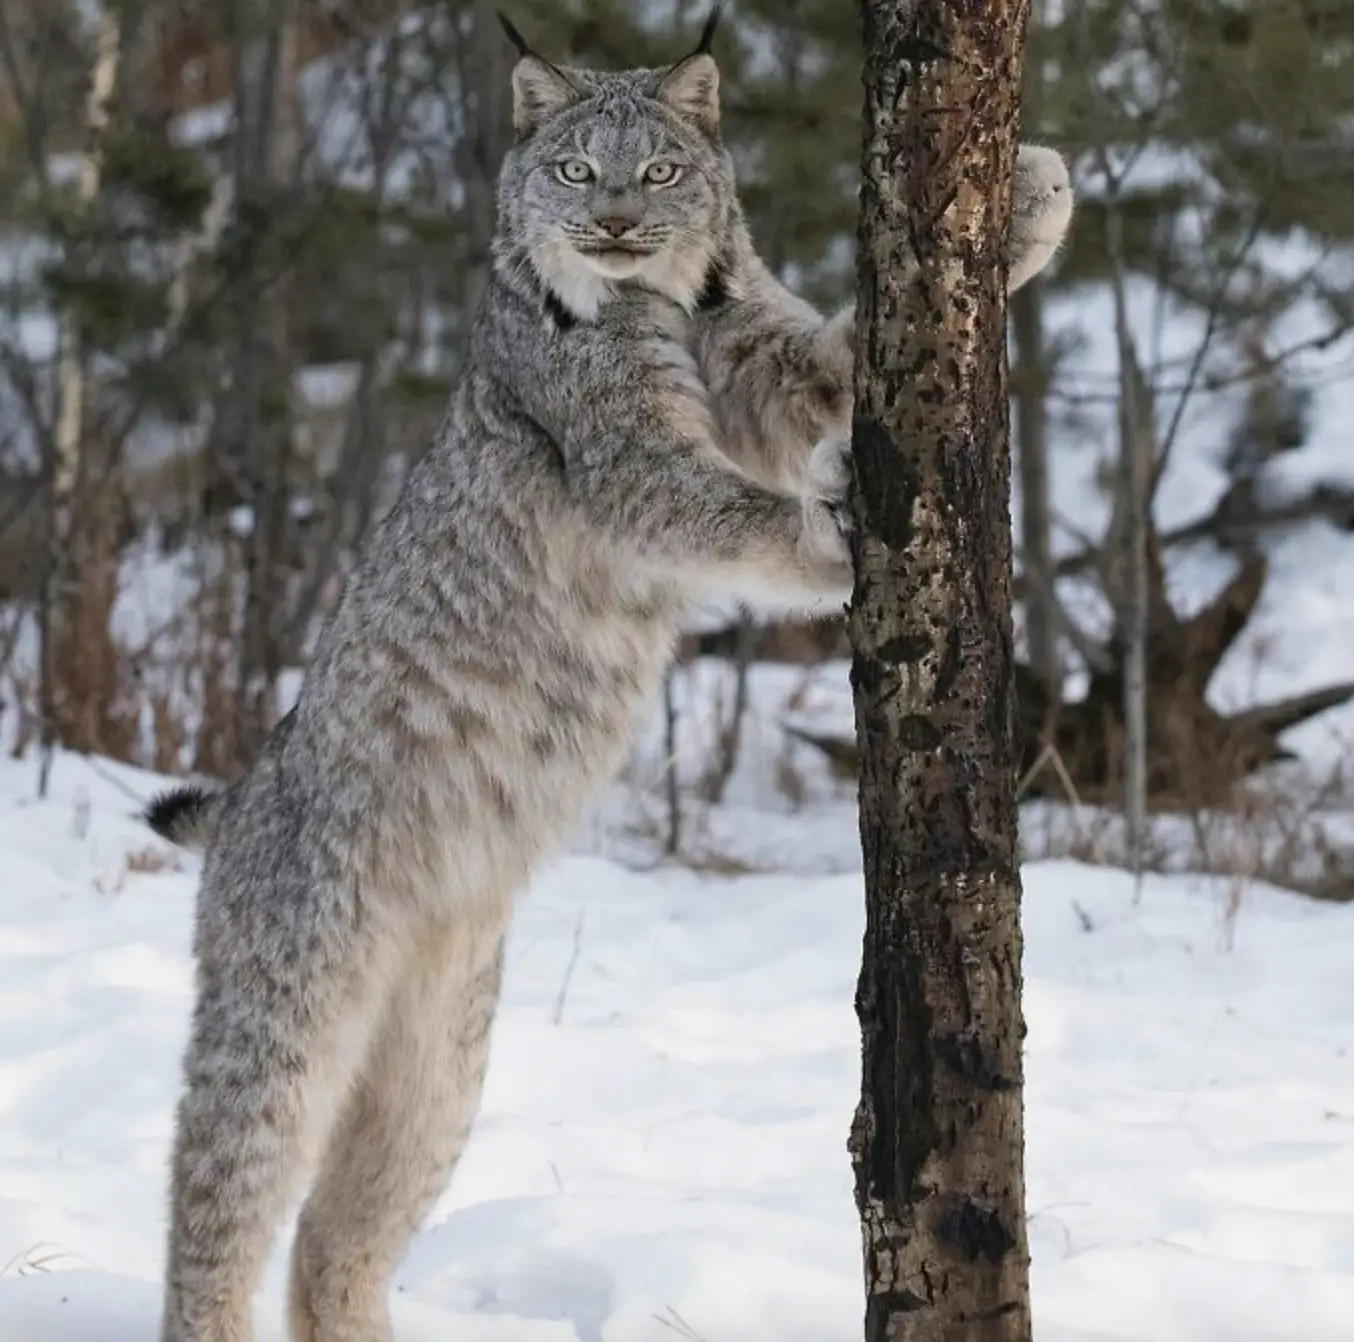 Despite their stocky body and short tail, Canadian Lynxes are excellent jumpers and can leap several feet in the air to catch birds or climb trees to escape threats or scan for prey.